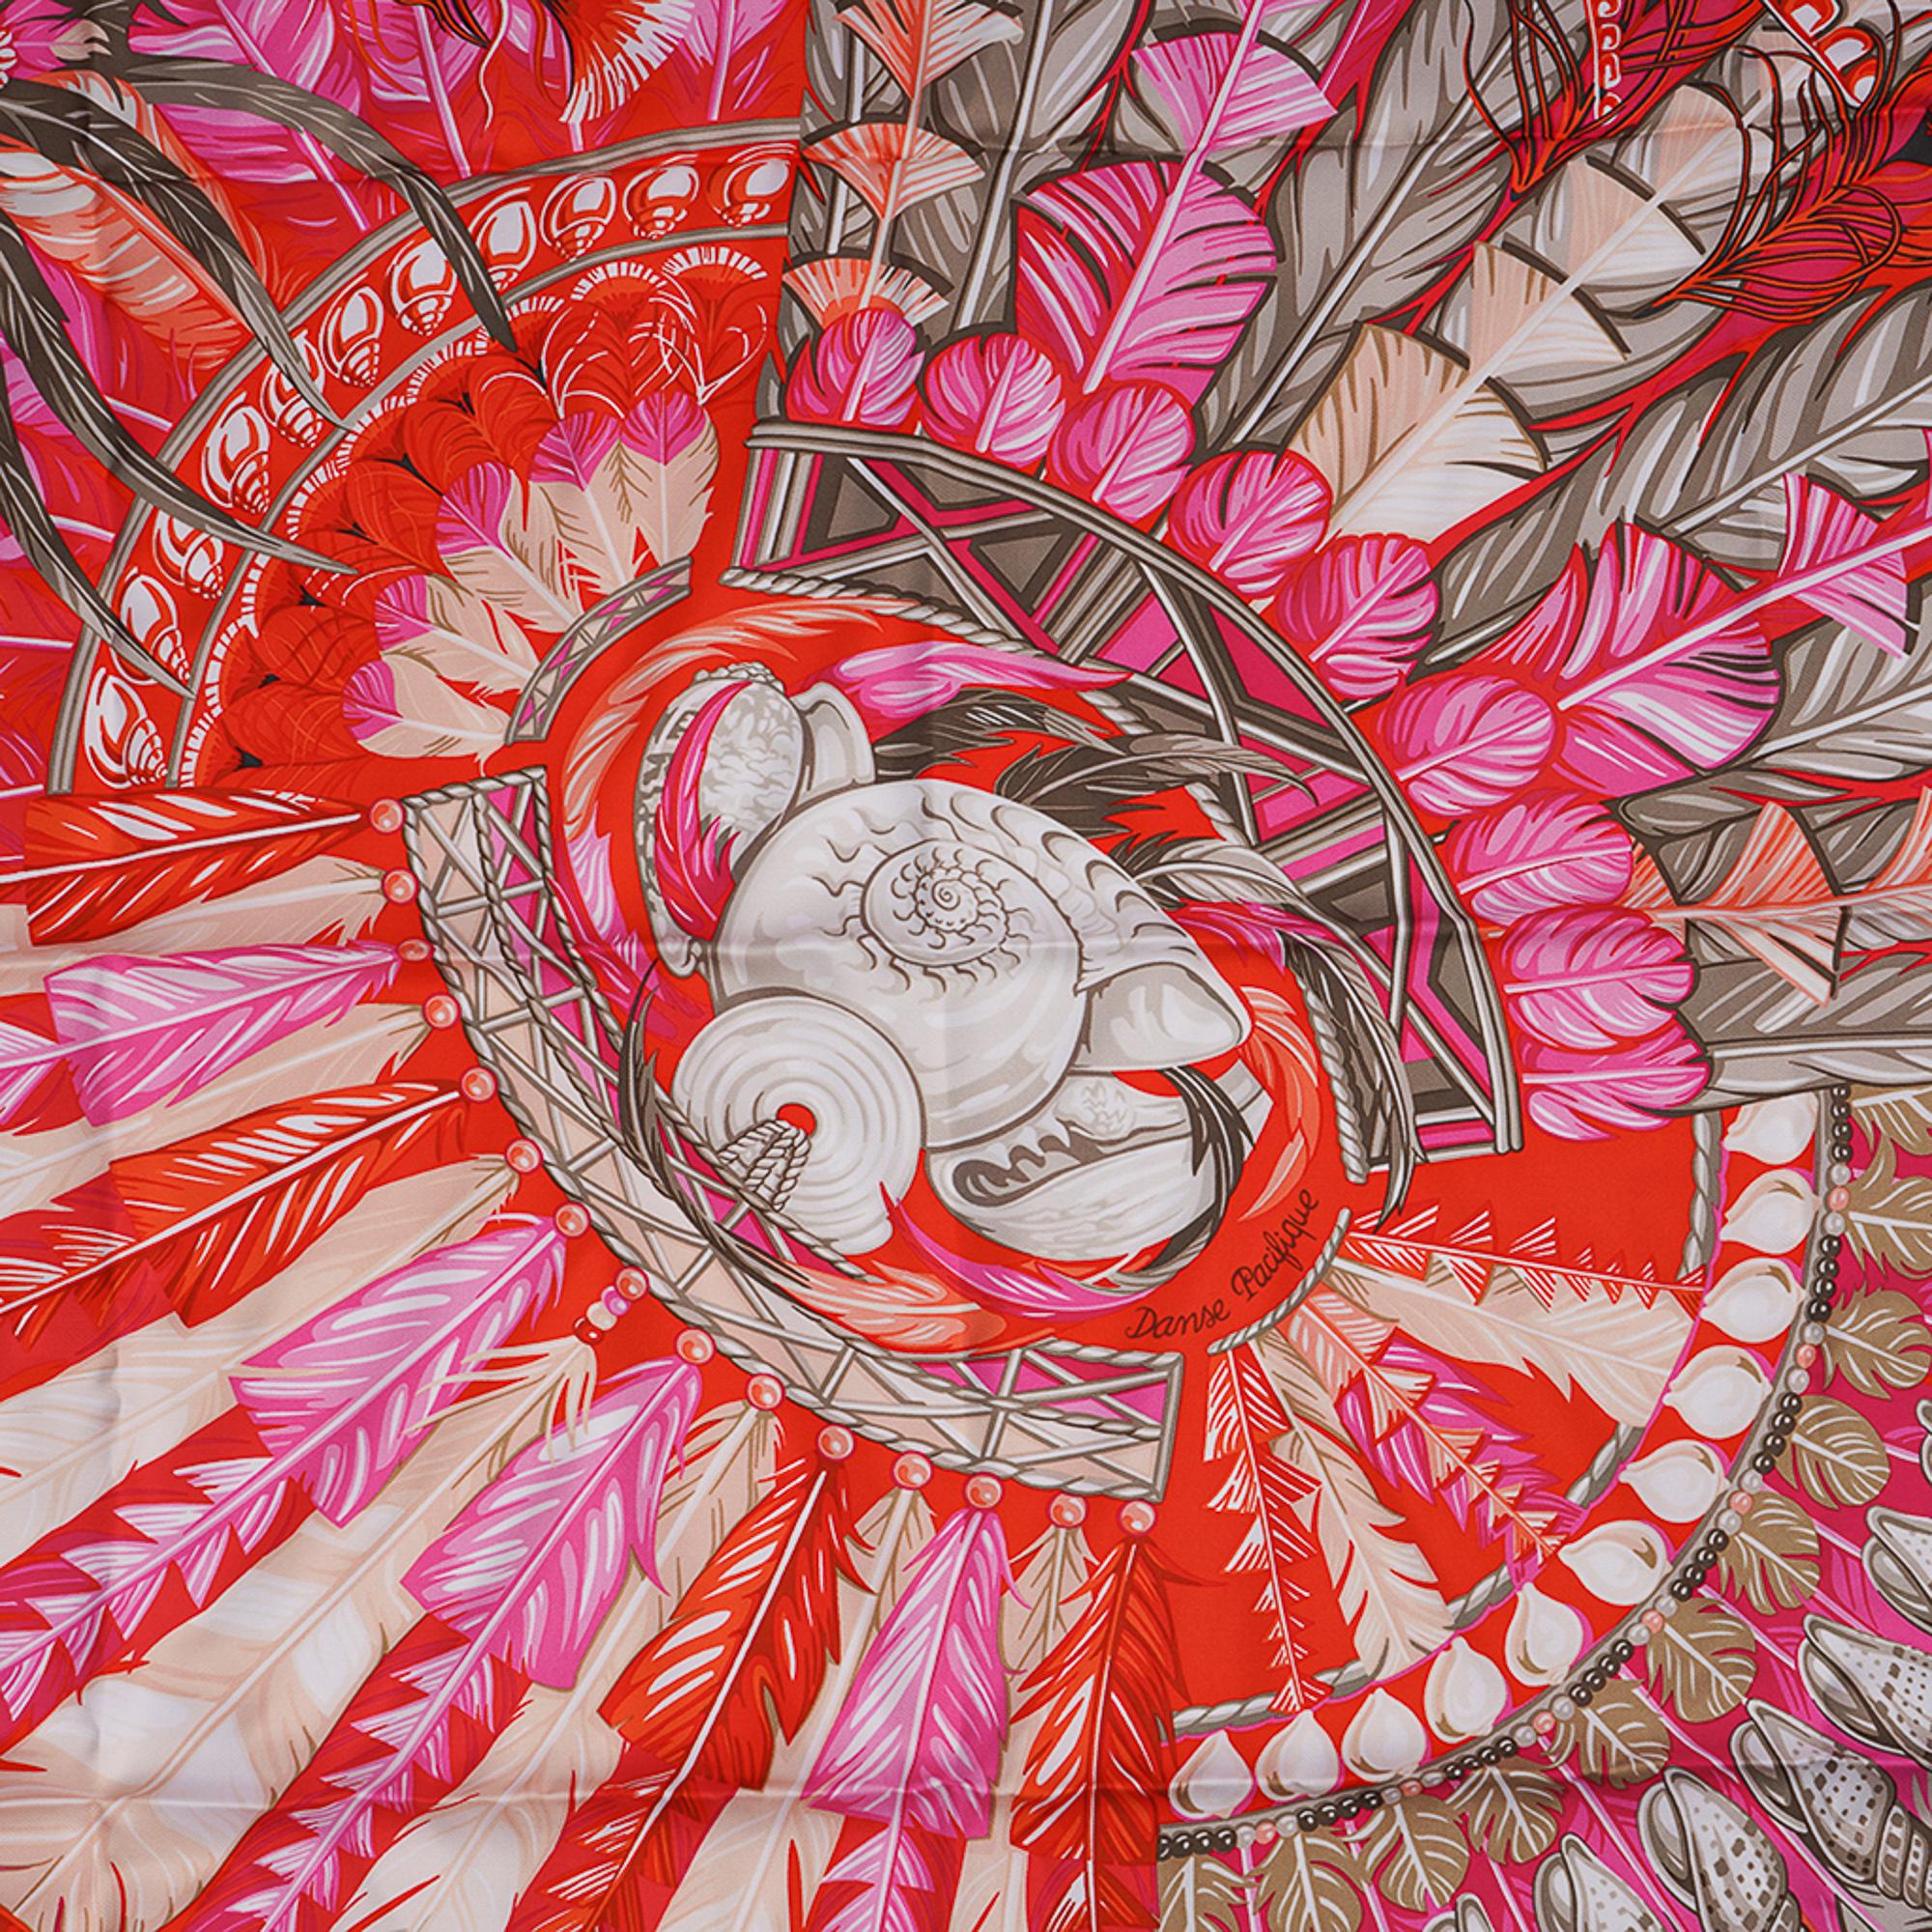 Mightychic offers a guaranteed authentic Hermes Danse Pacifique Silk scarf by Laurence Bourthoumieux.
Pays tribute to the culture of New Guinea.
Features the feather and cowry adorned headdresses of the Pacific.
Orange and Rose Vif